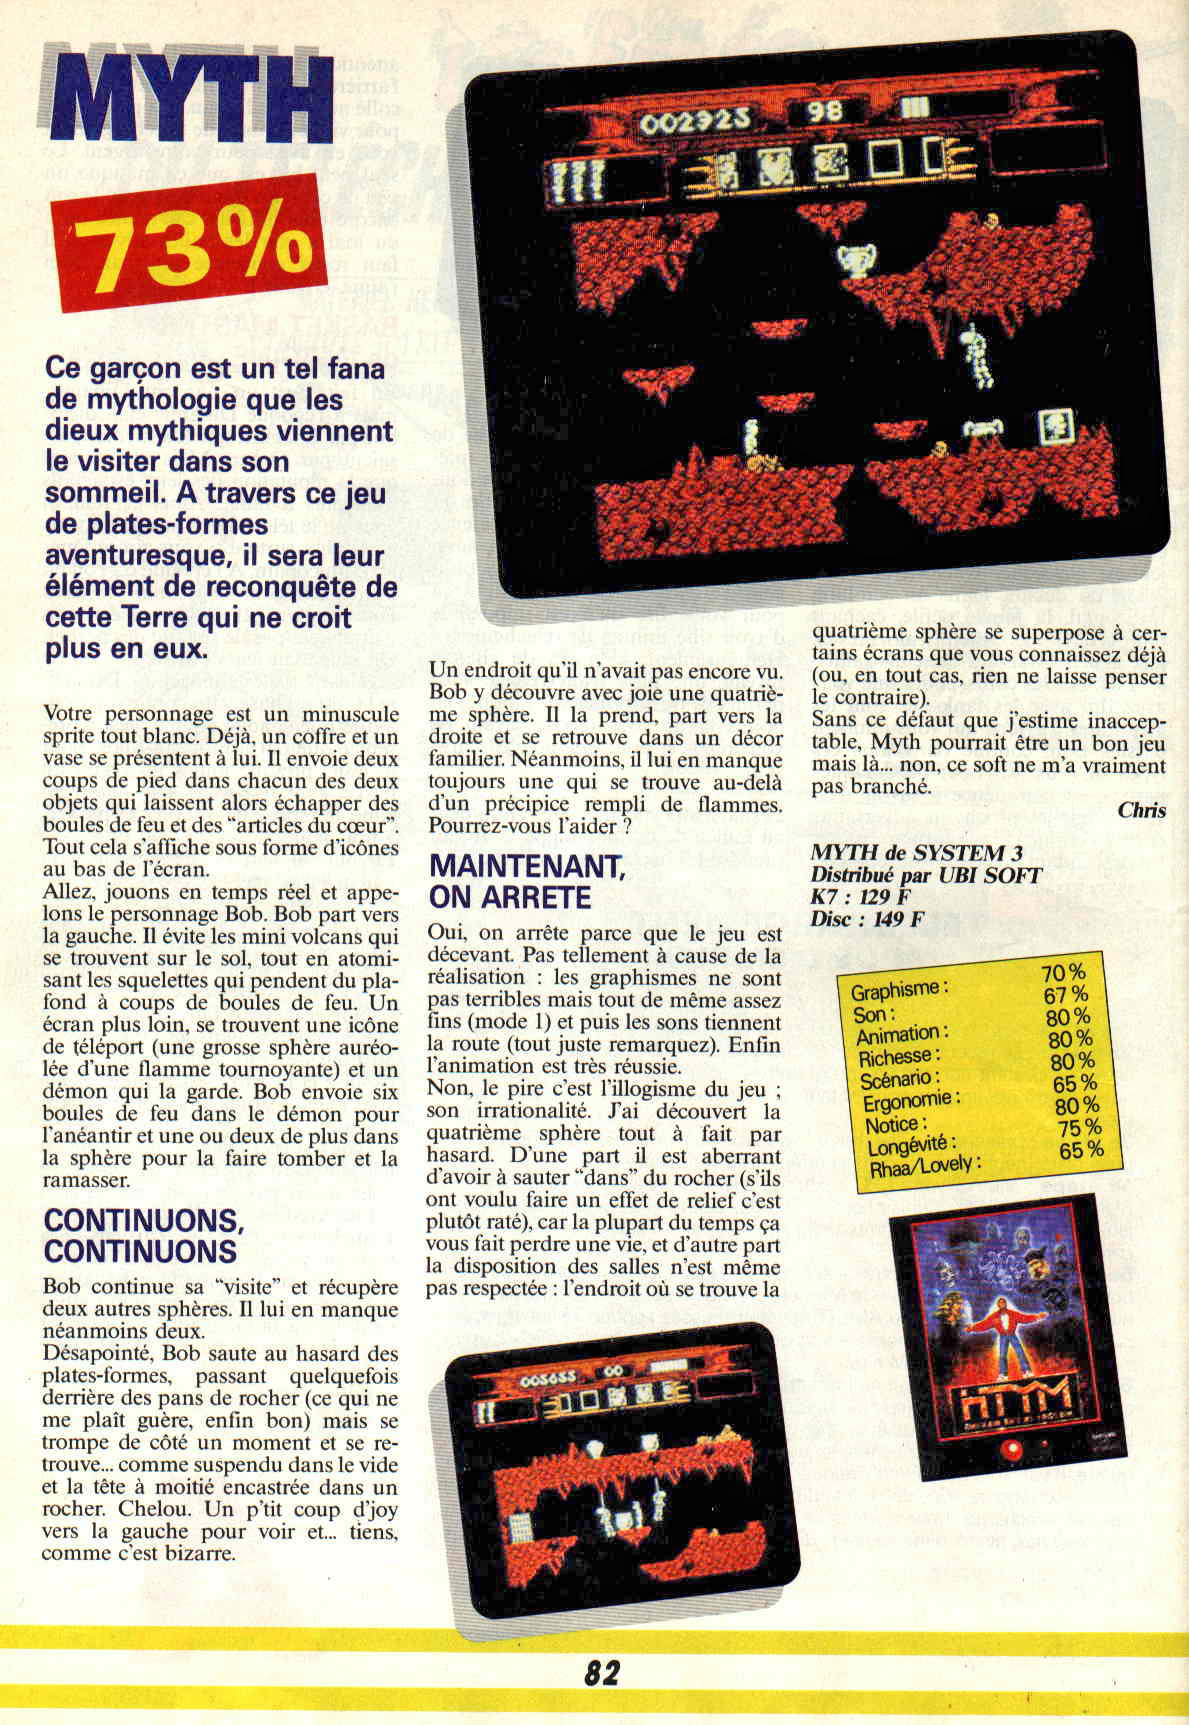 amstrad_100_pour_cent_n_24_marzo_1990_pag.82.jpg